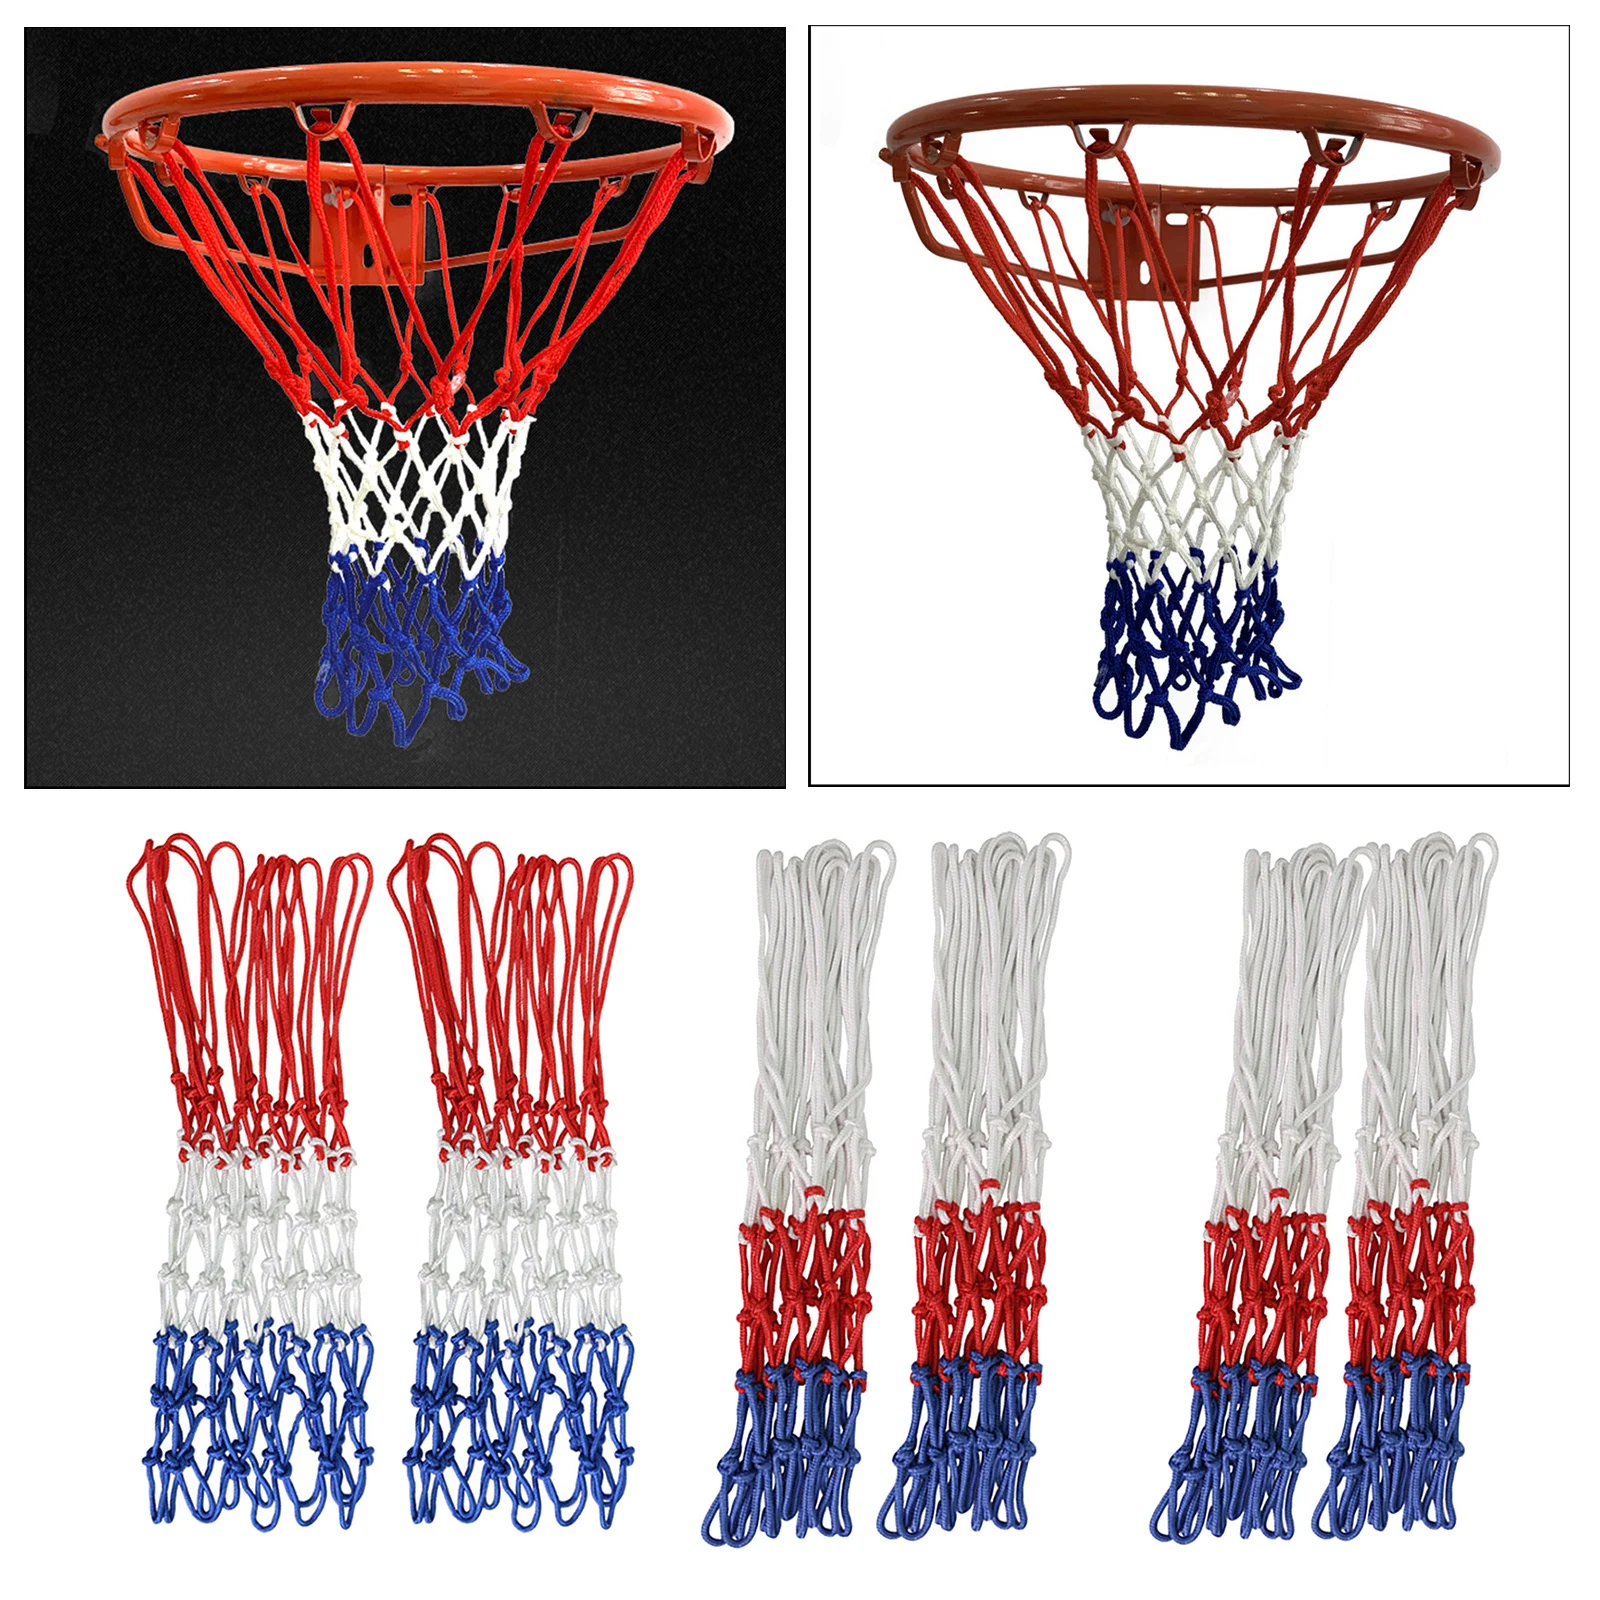 Standard Professional Polyester Braided Basketball Net for Outdoors Indoors 